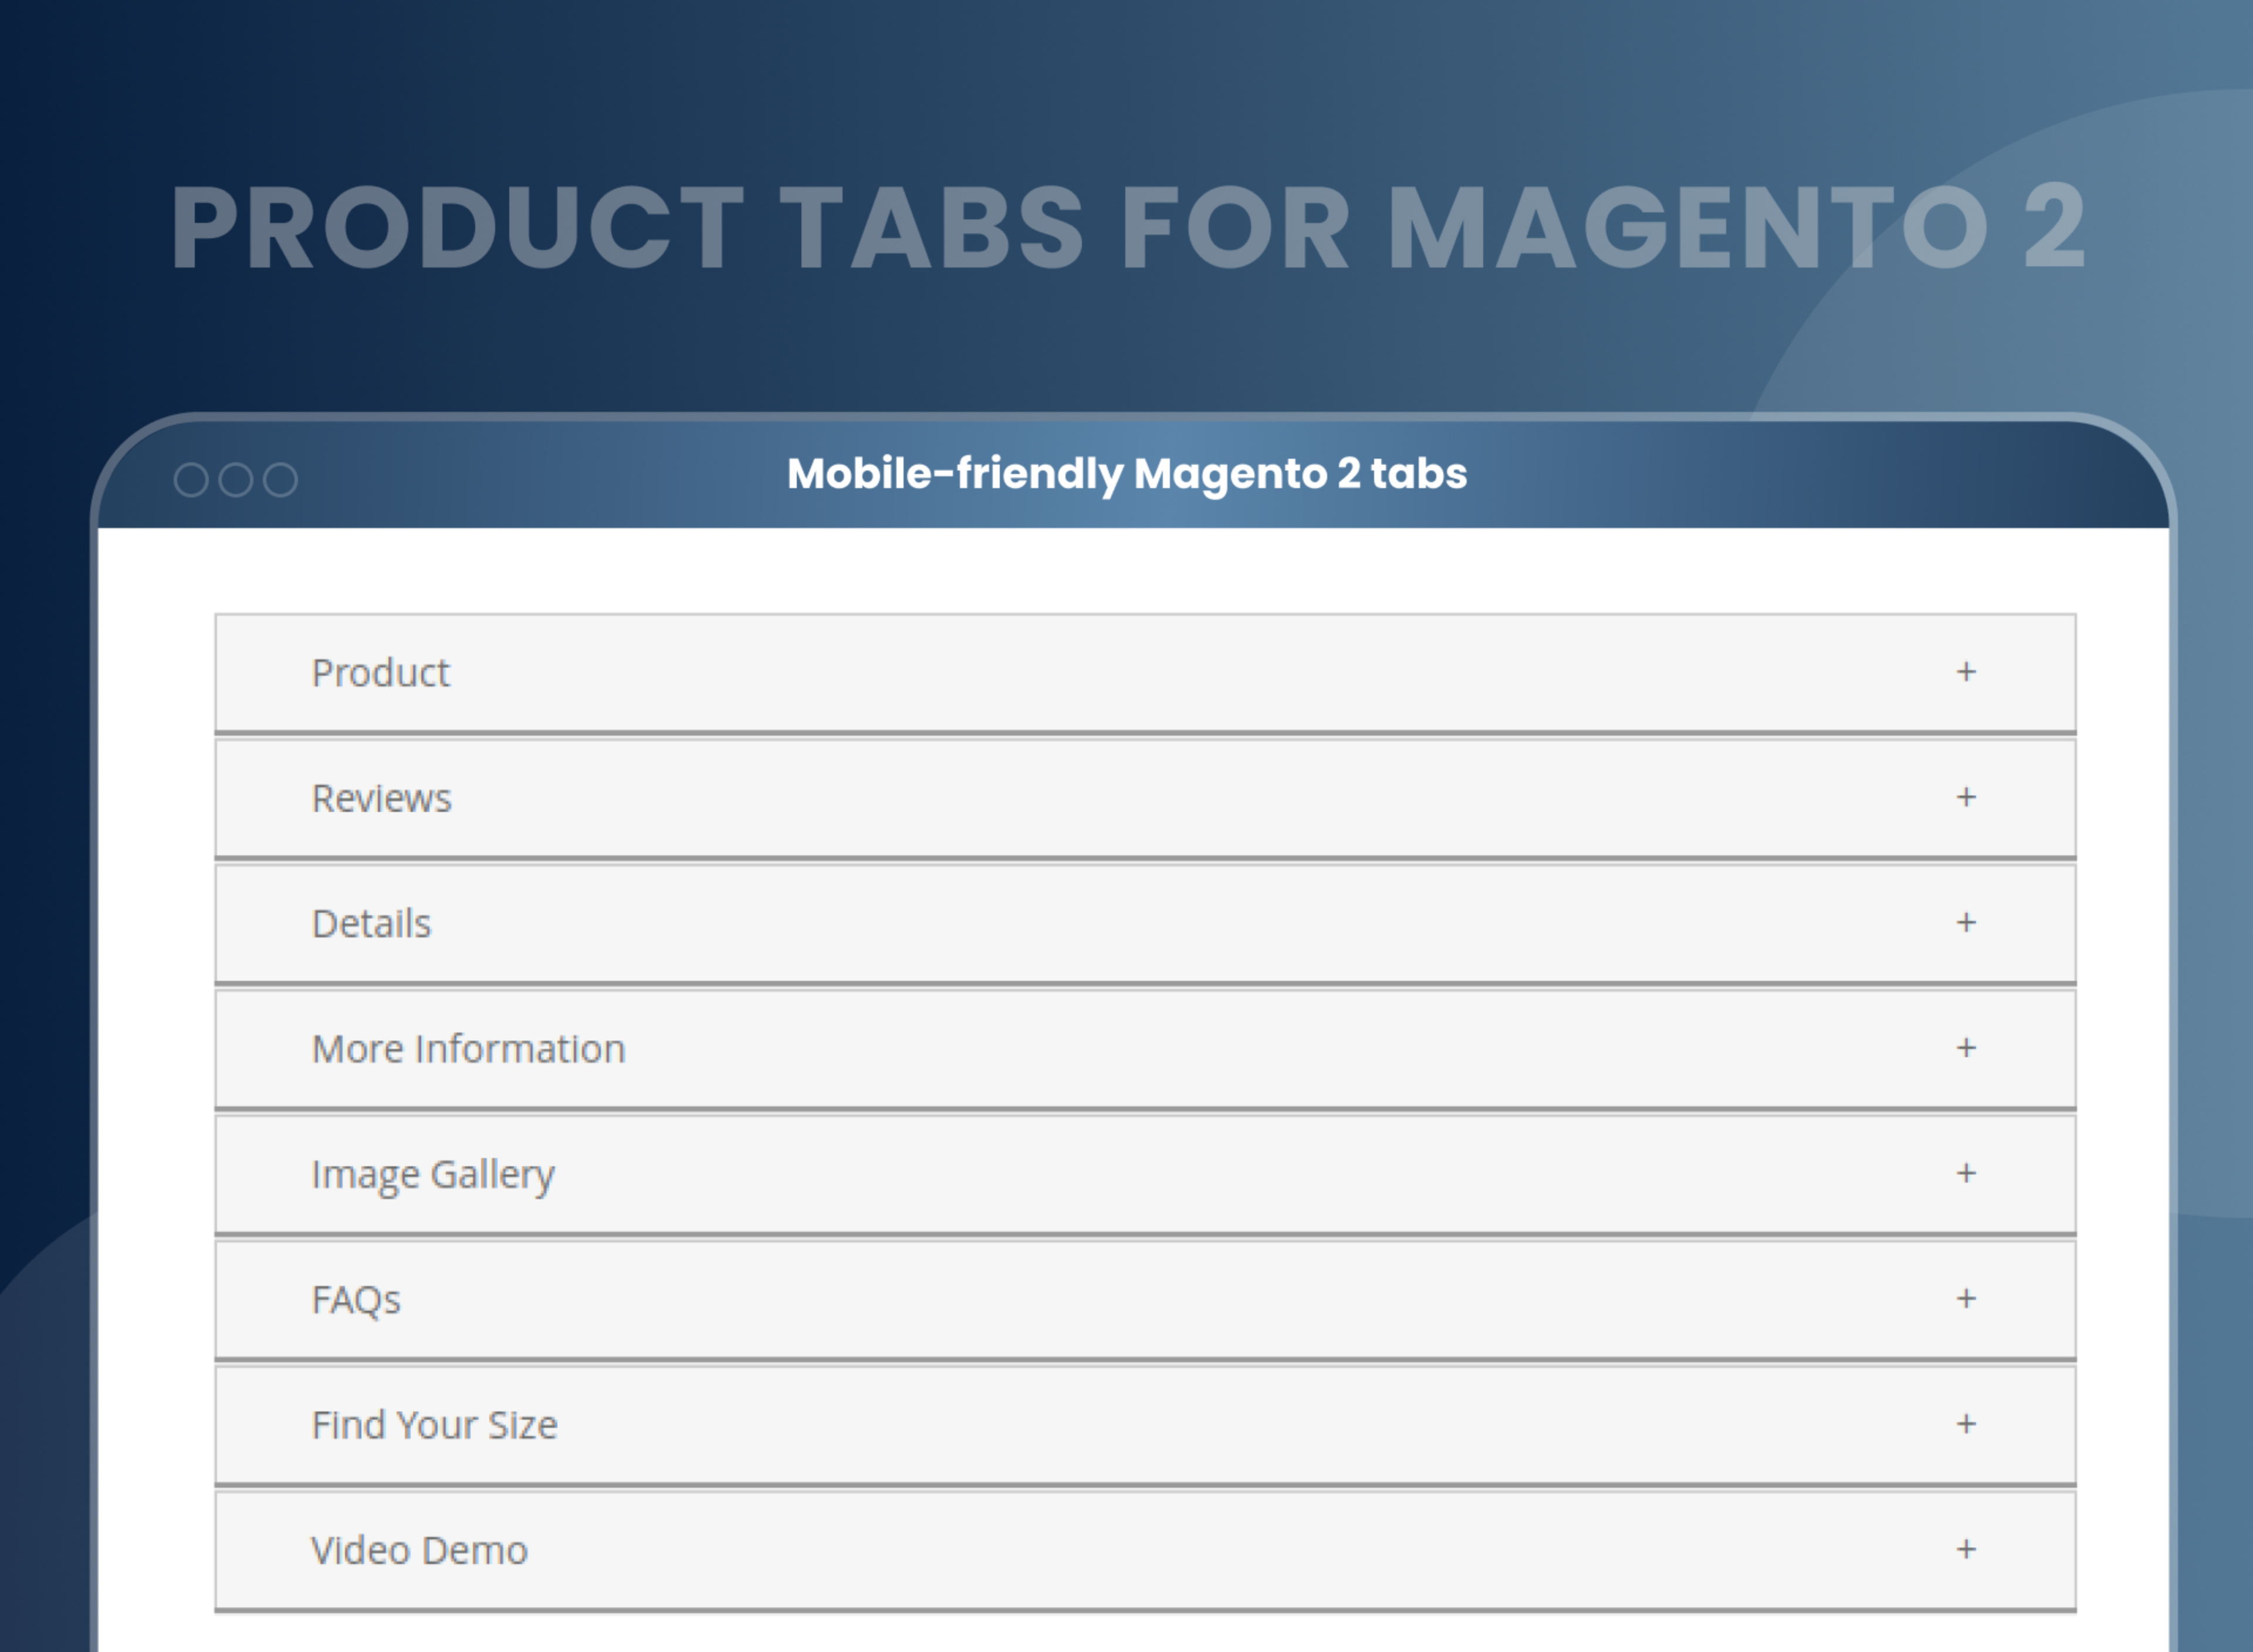 mobile-friendly Magento2 tabs